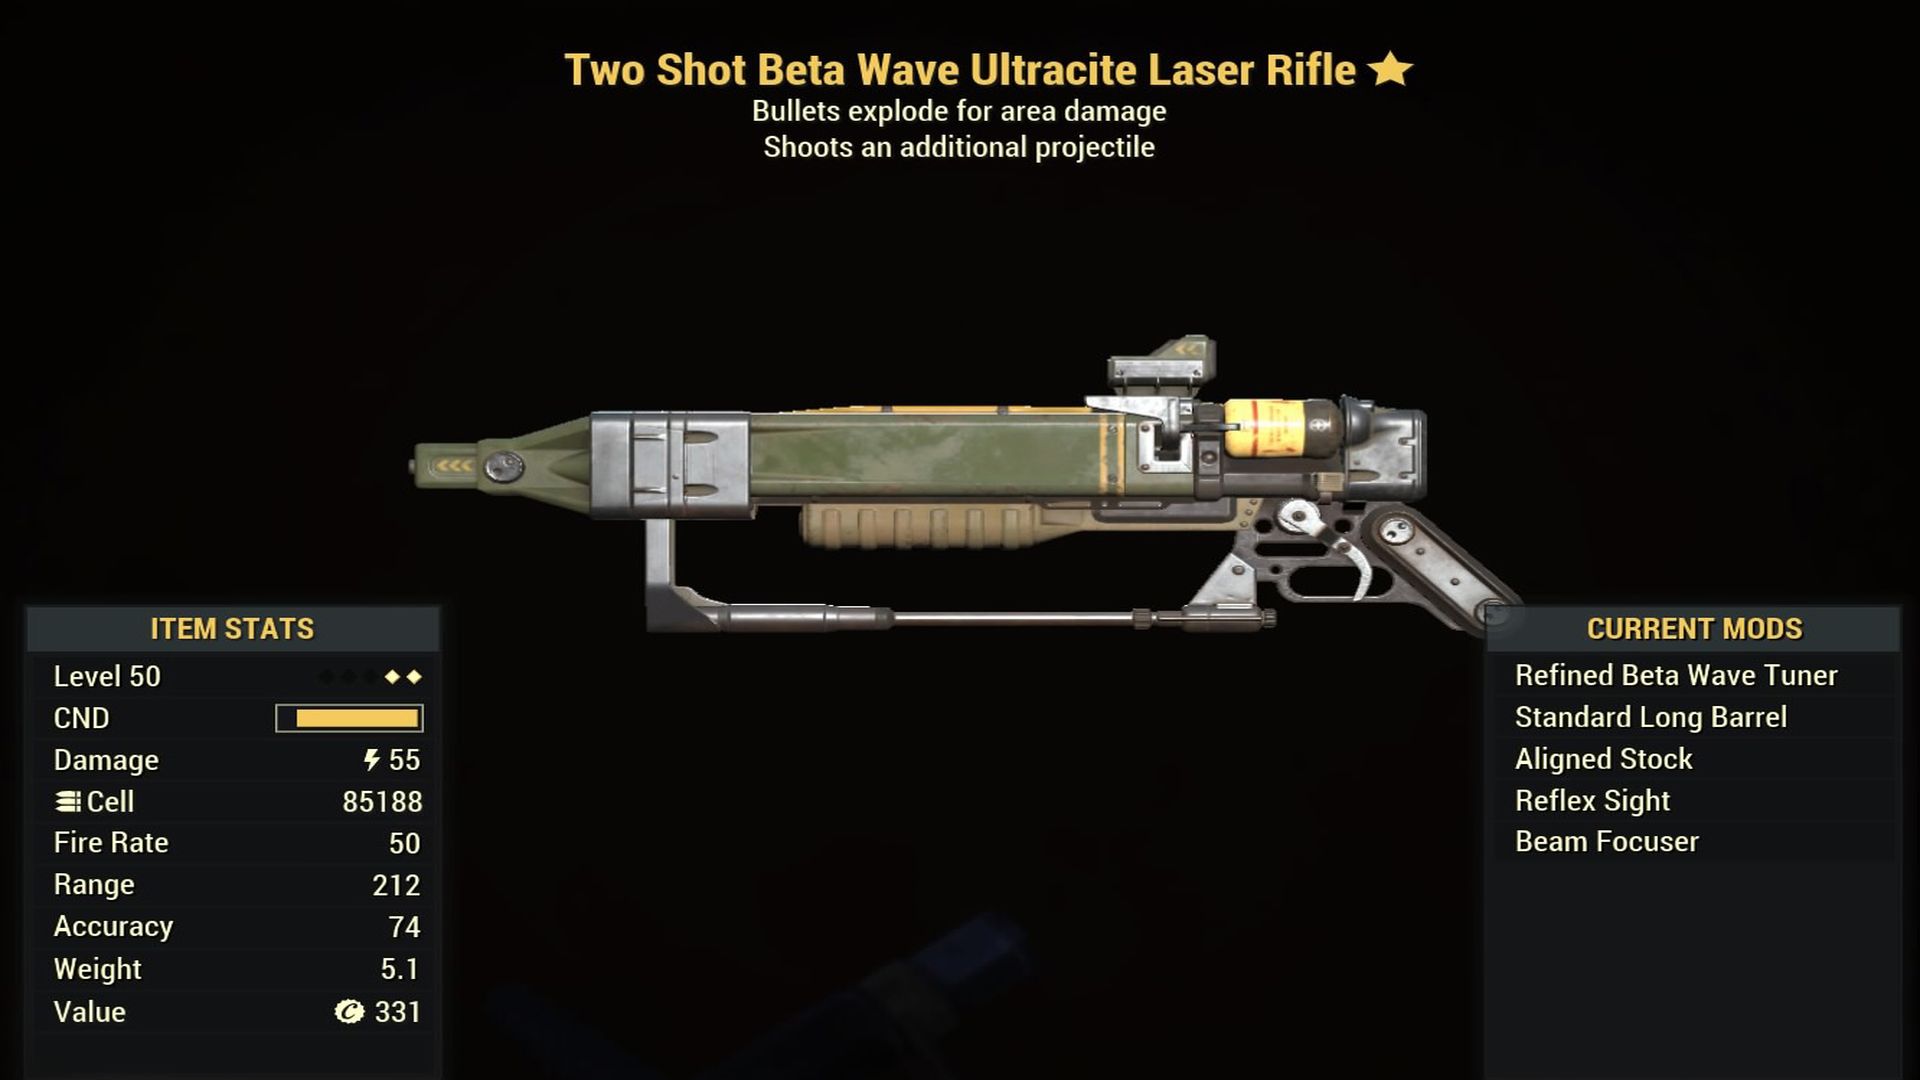 Fallout 76 Two Shot Beta Wave Ultracite Laser Rifle - Level 50